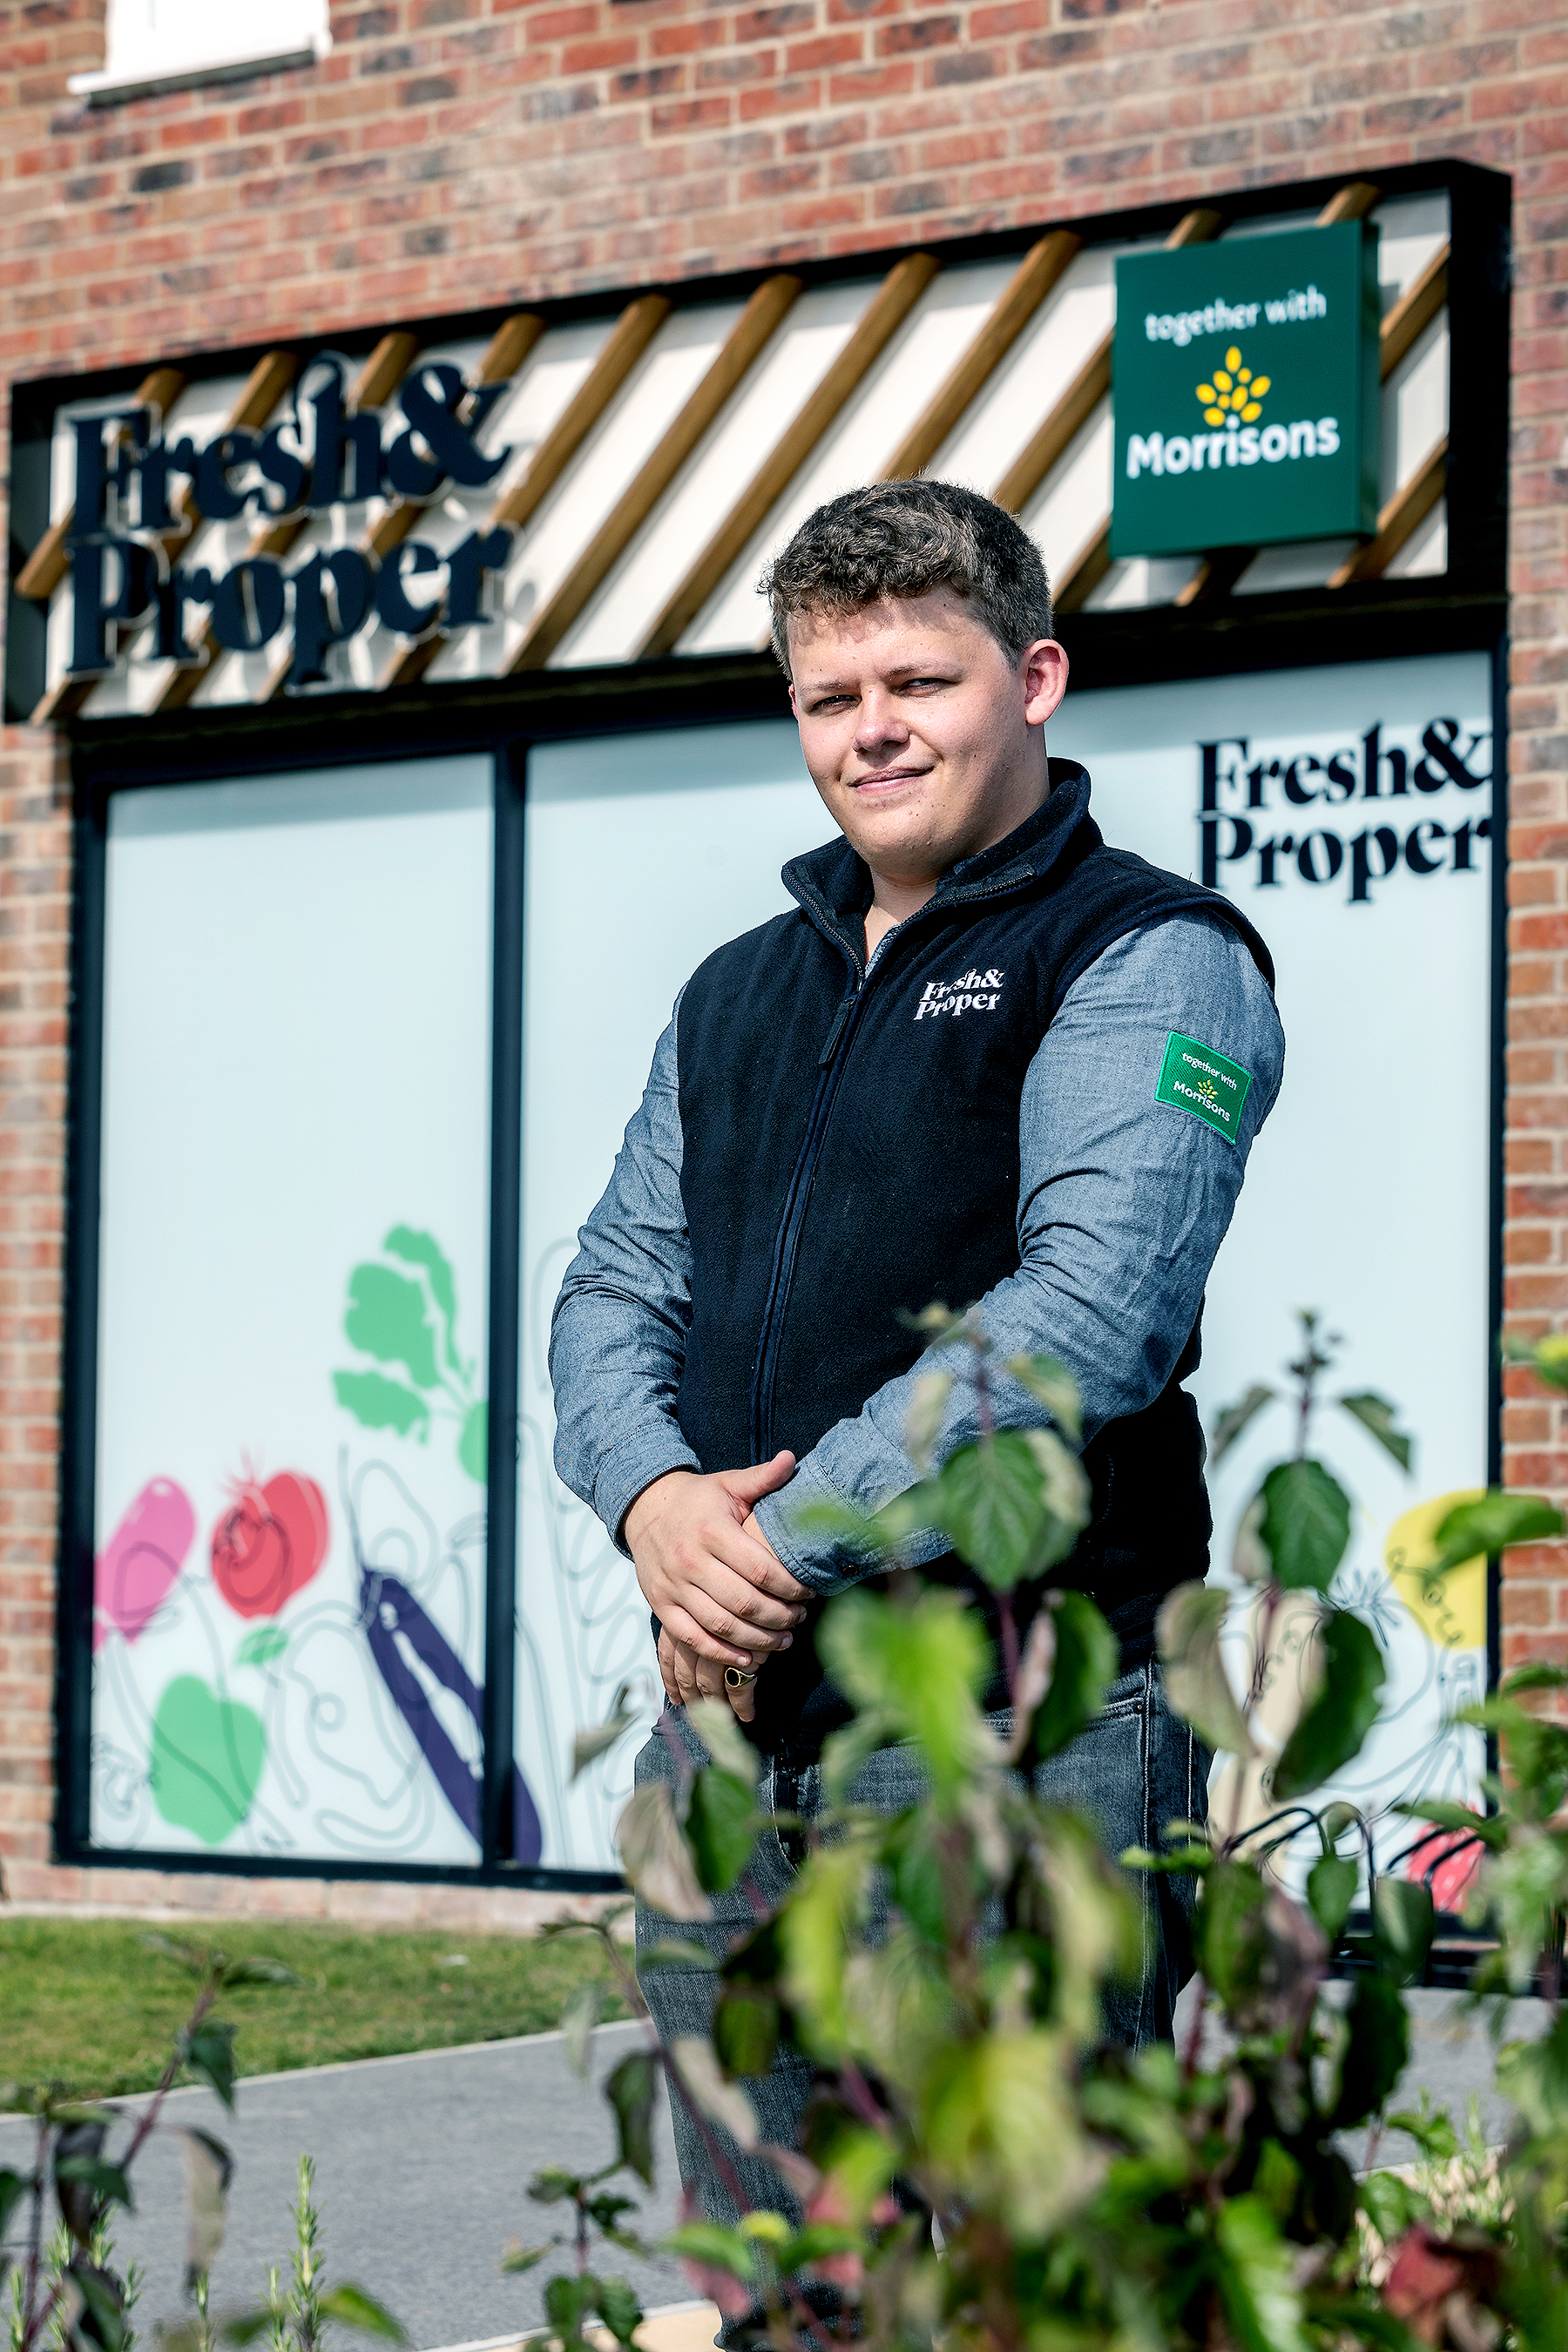 Morrisons partners with Fresh & Proper to launch third ‘Together with Morrisons' store